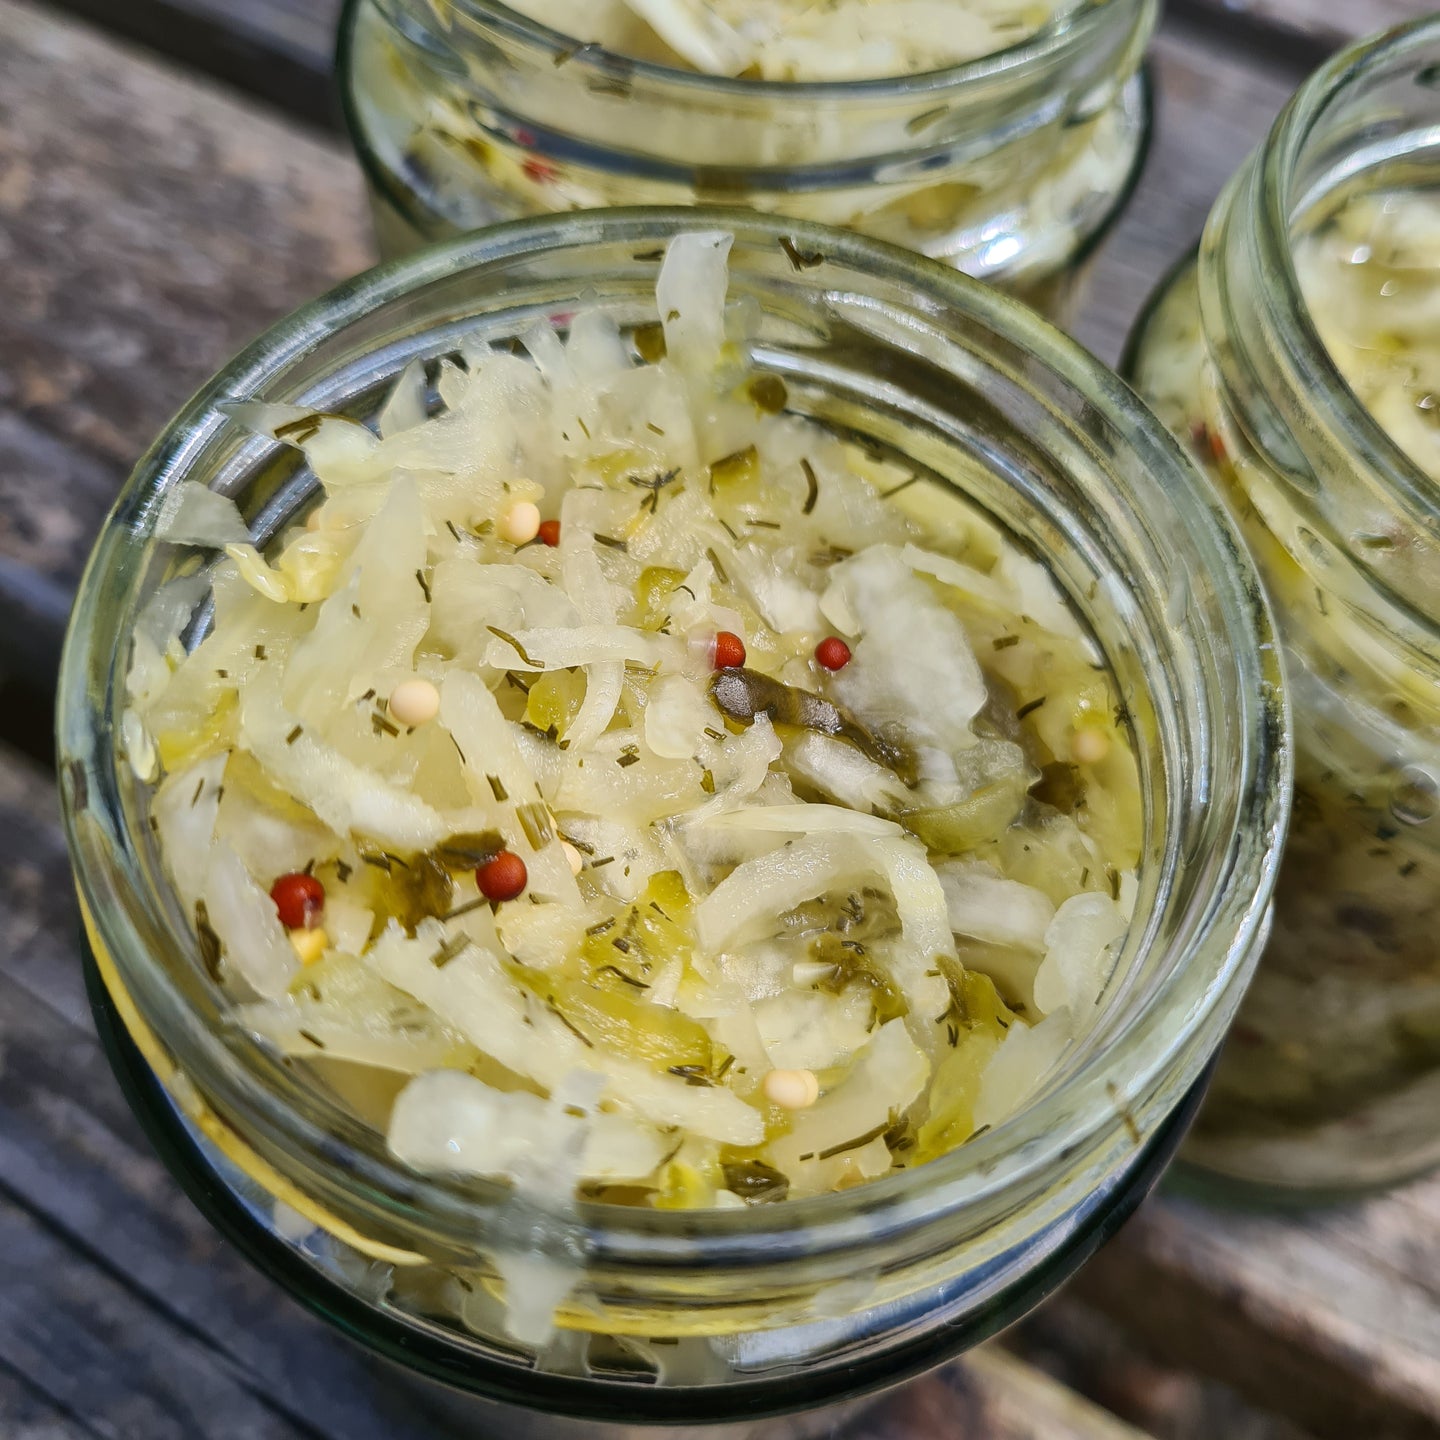 LIMITED EDITION Dill Pickle Kraut